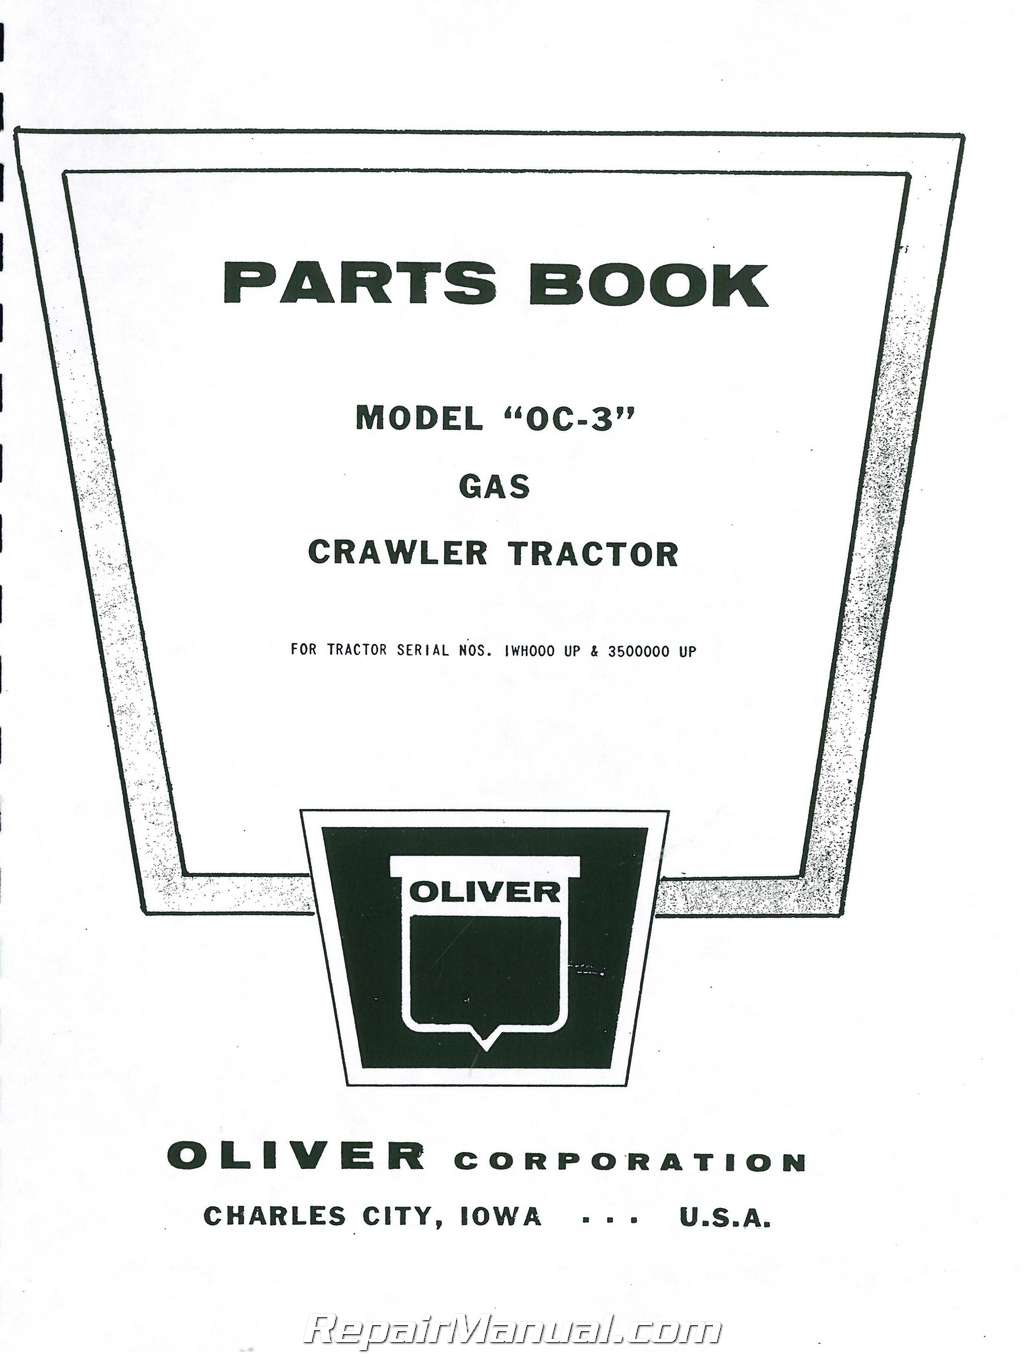 3 cylinder gas Oliver OC-4-3G — covers everything Parts Manual for mid-series 